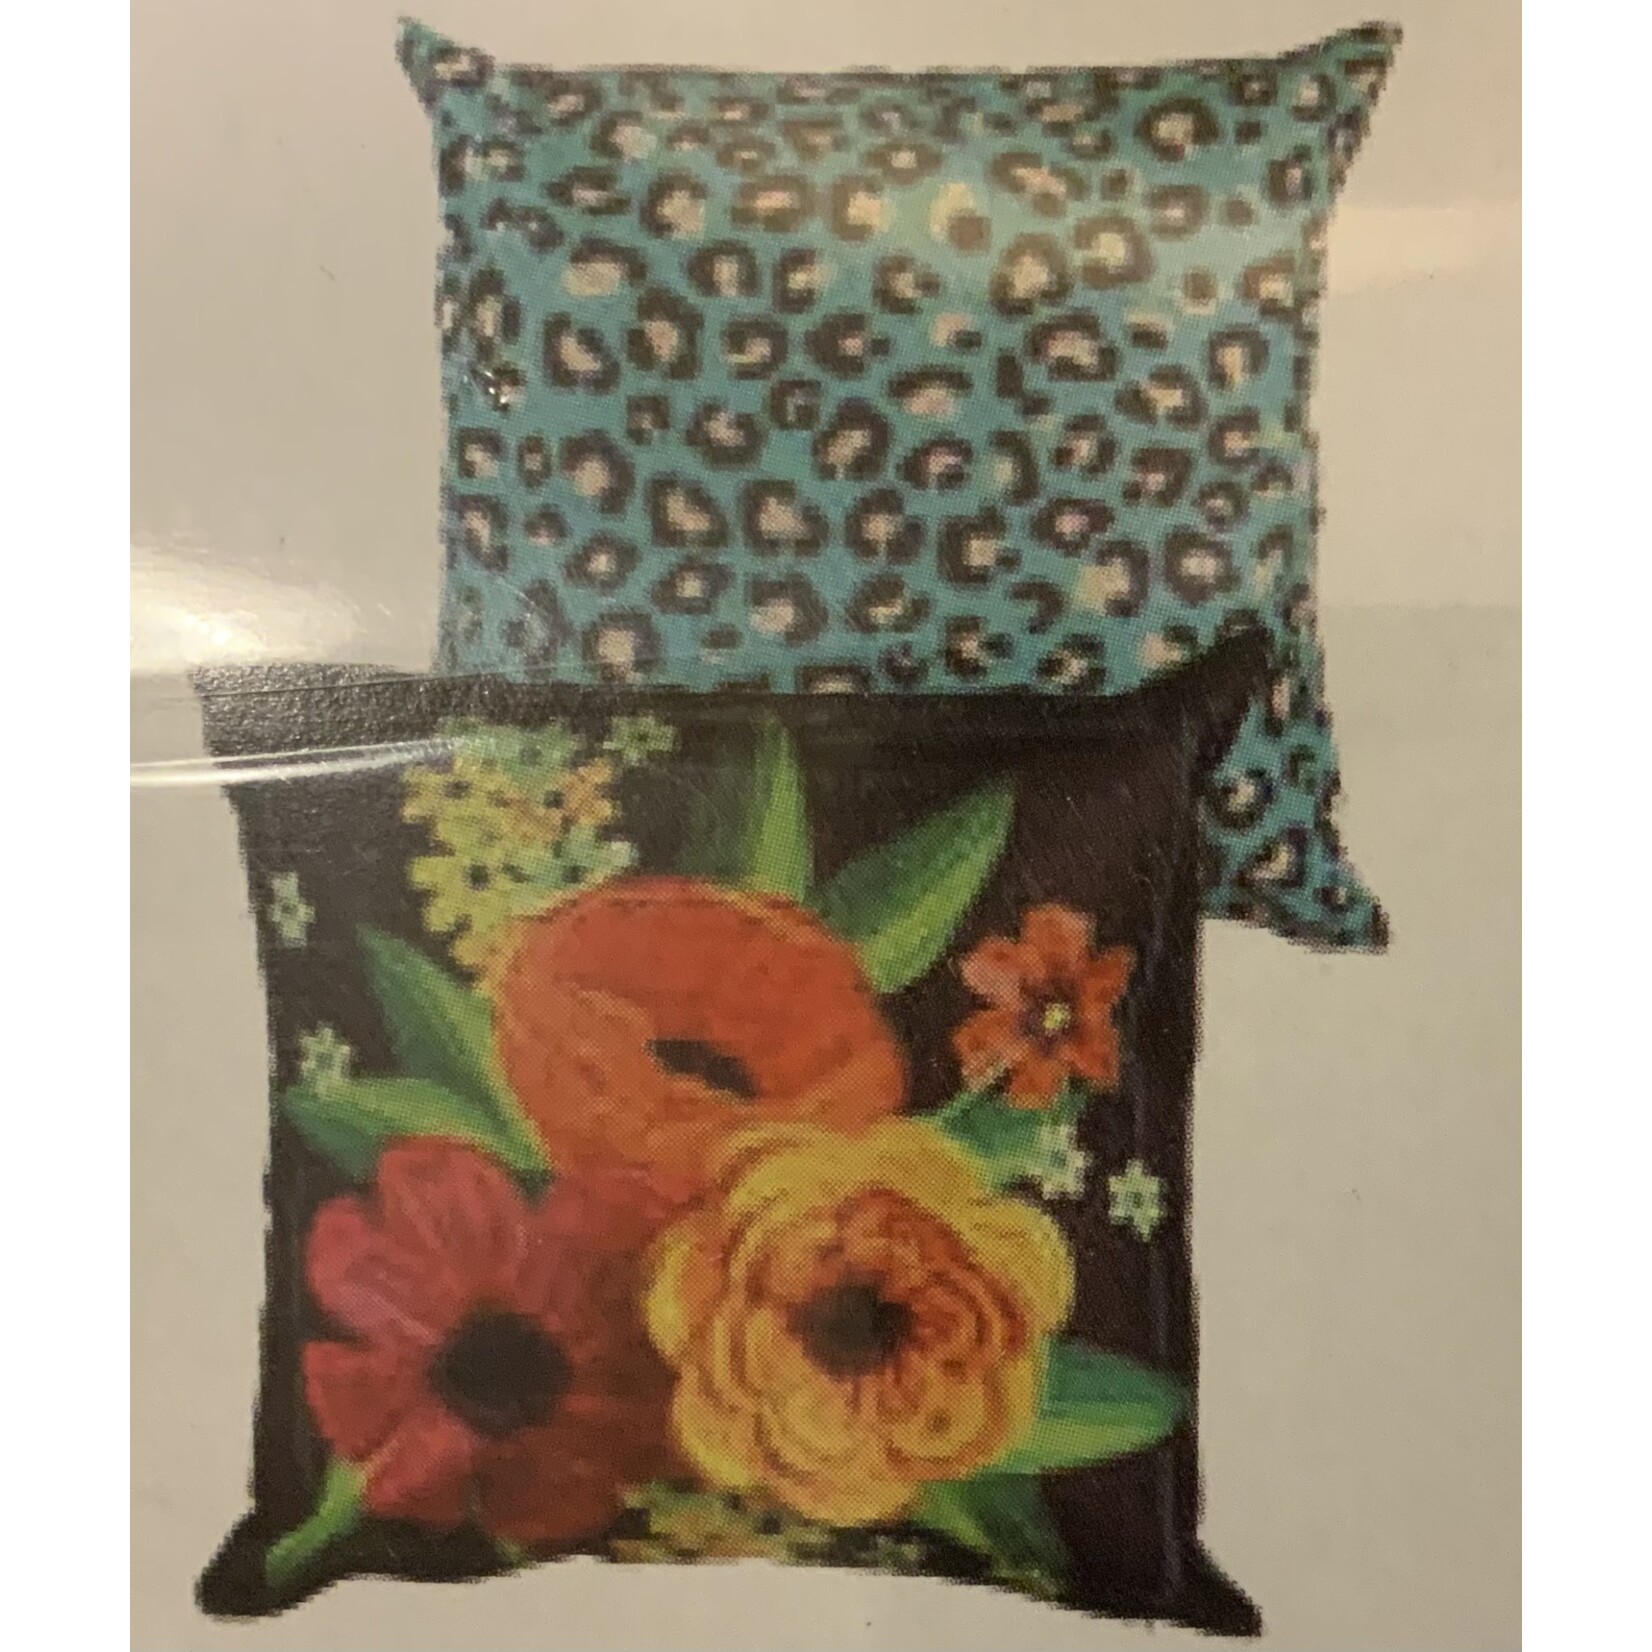 Evergreen Animal Print & Floral Interchangeable Pillow Cover